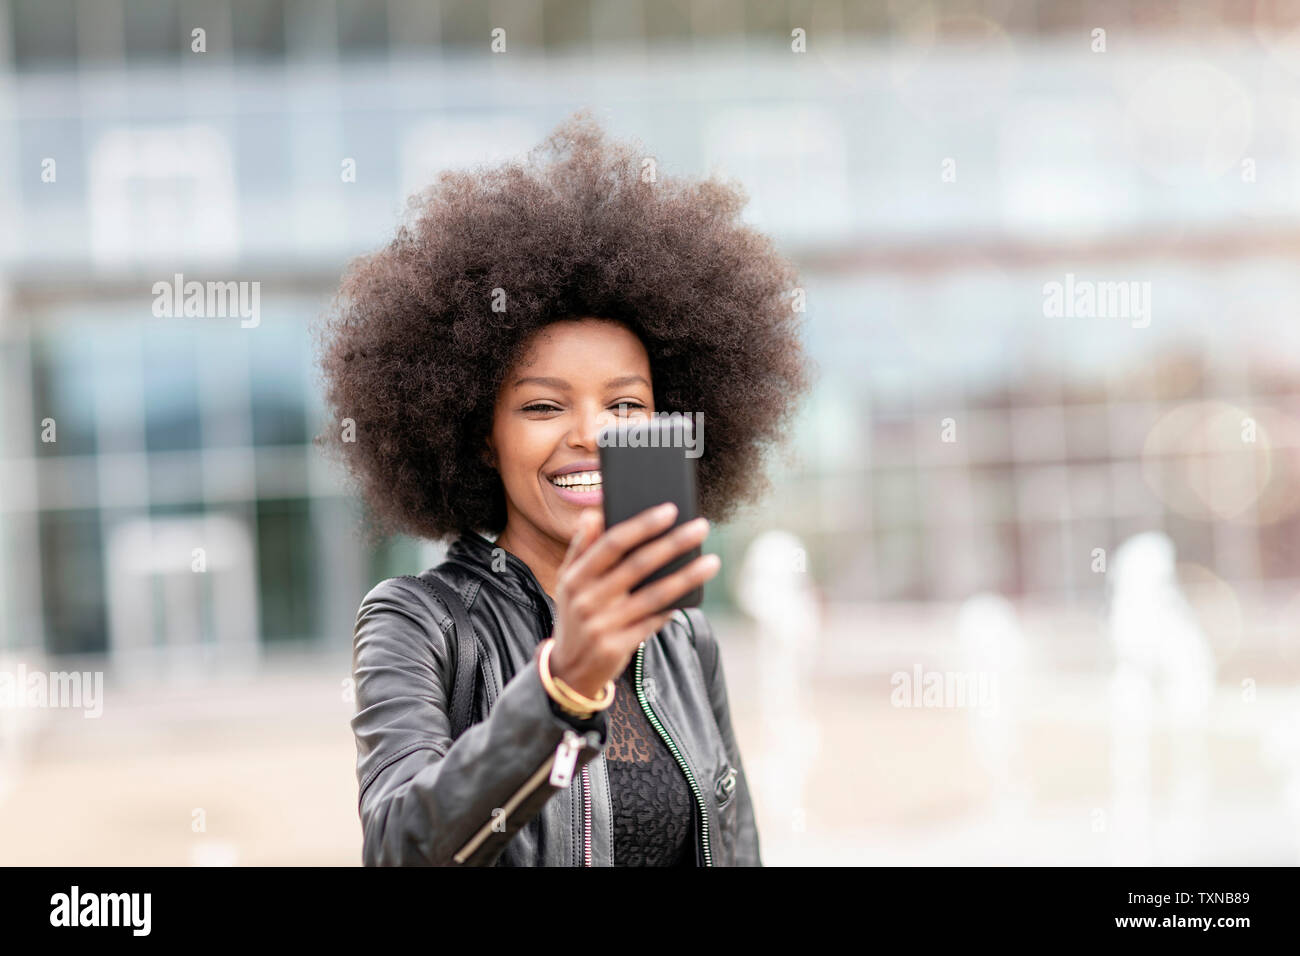 Young woman with afro hair taking smartphone selfie on city concourse Stock Photo